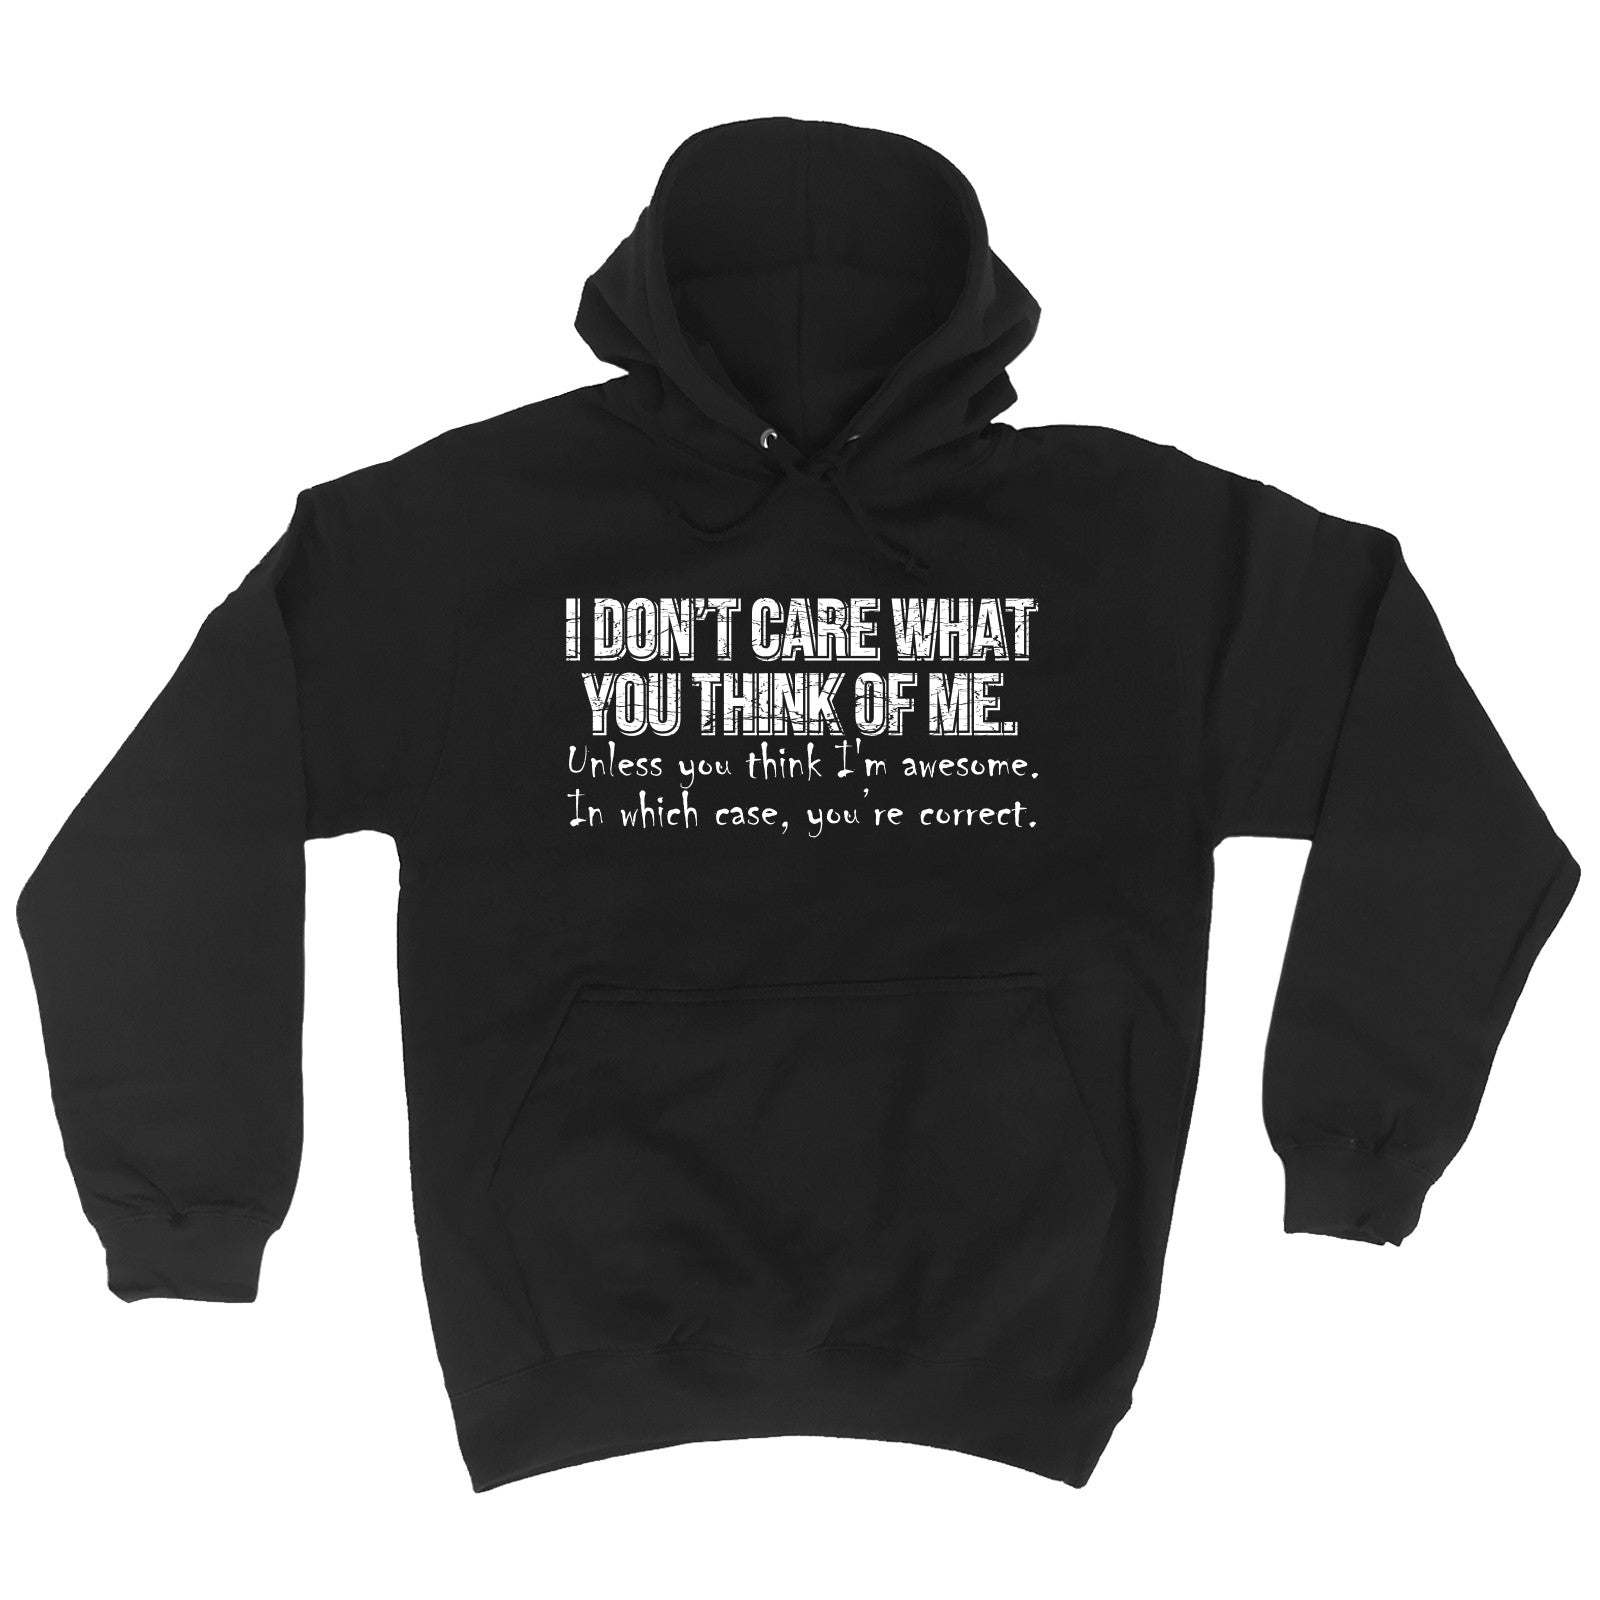 I DonÆt Care What You Think Of Me HOODIE hoody birthday gift sarcastic ...